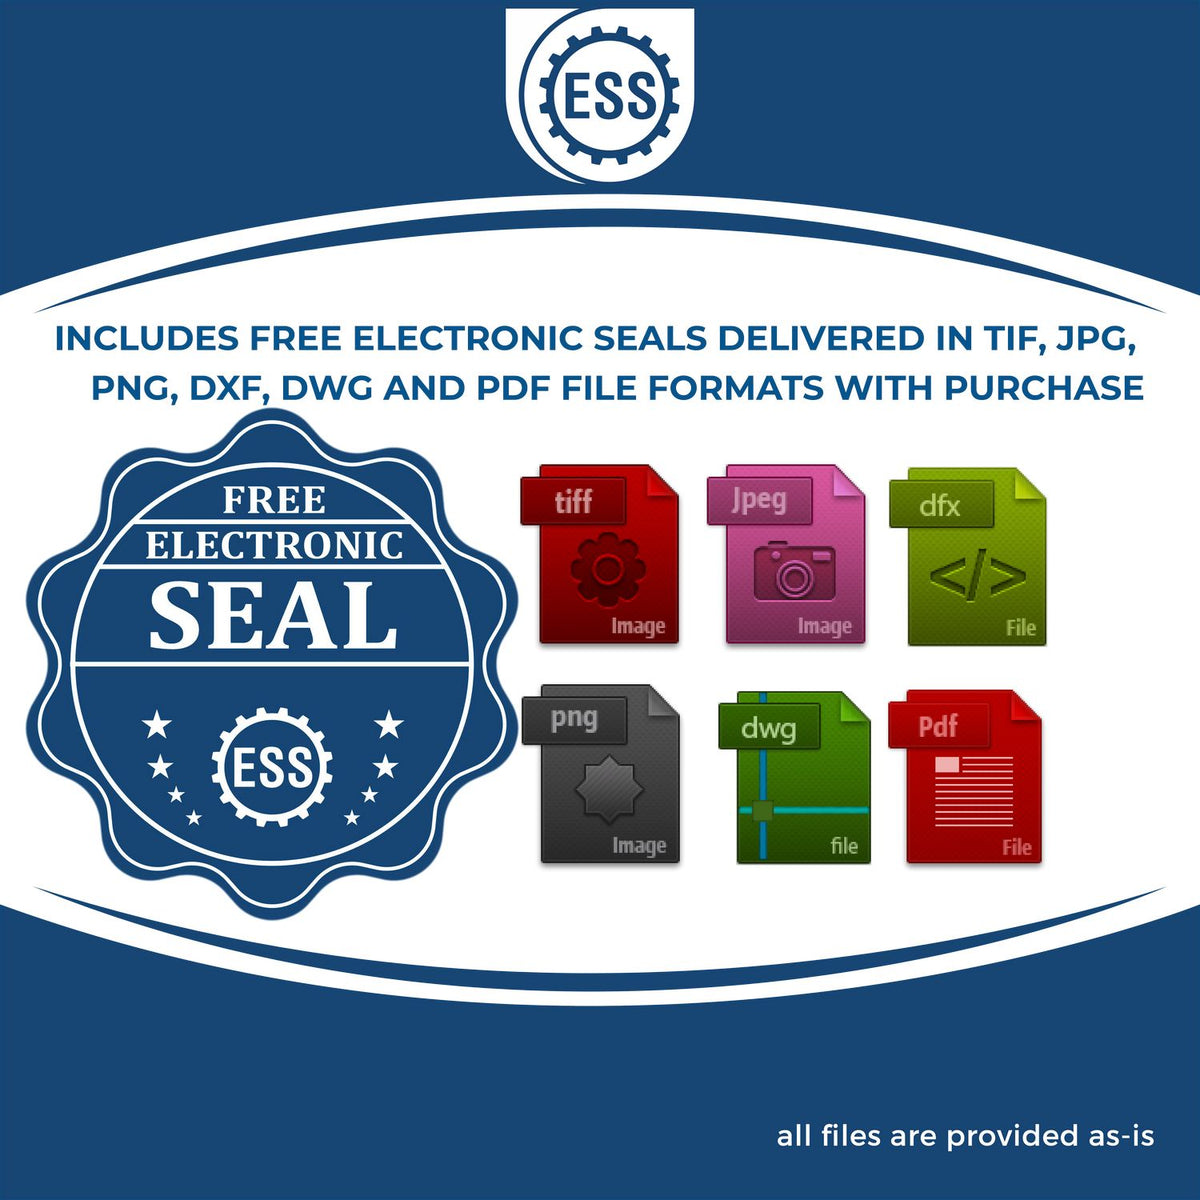 An infographic for the free electronic seal for the State of Oklahoma Extended Long Reach Geologist Seal illustrating the different file type icons such as DXF, DWG, TIF, JPG and PNG.